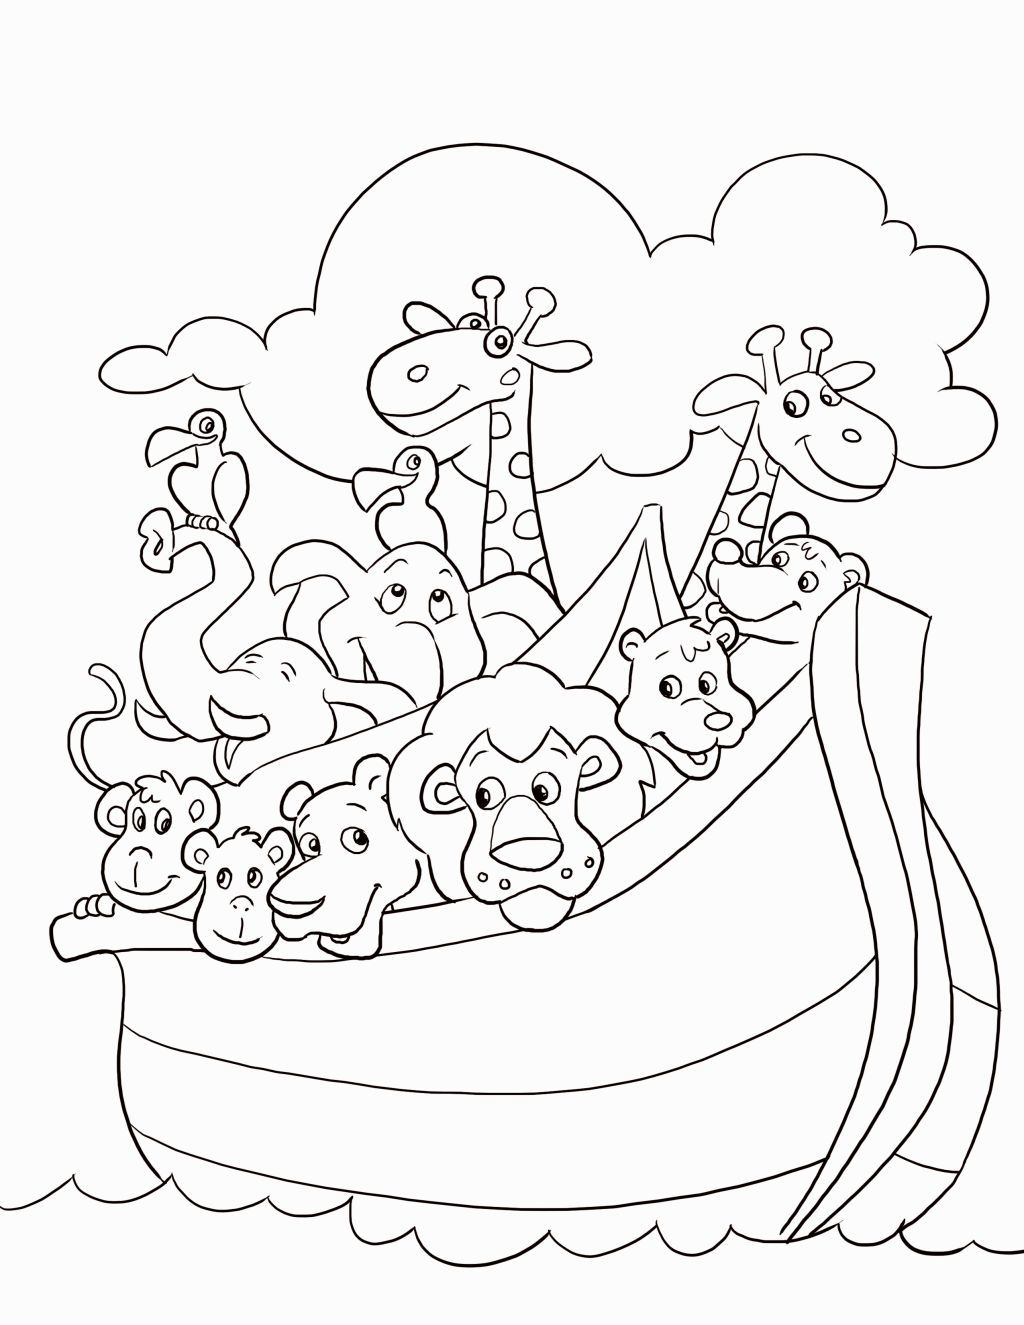 Christian Coloring Pages For Toddlers Coloring Pages Bible Coloring Activities For Preschoolers